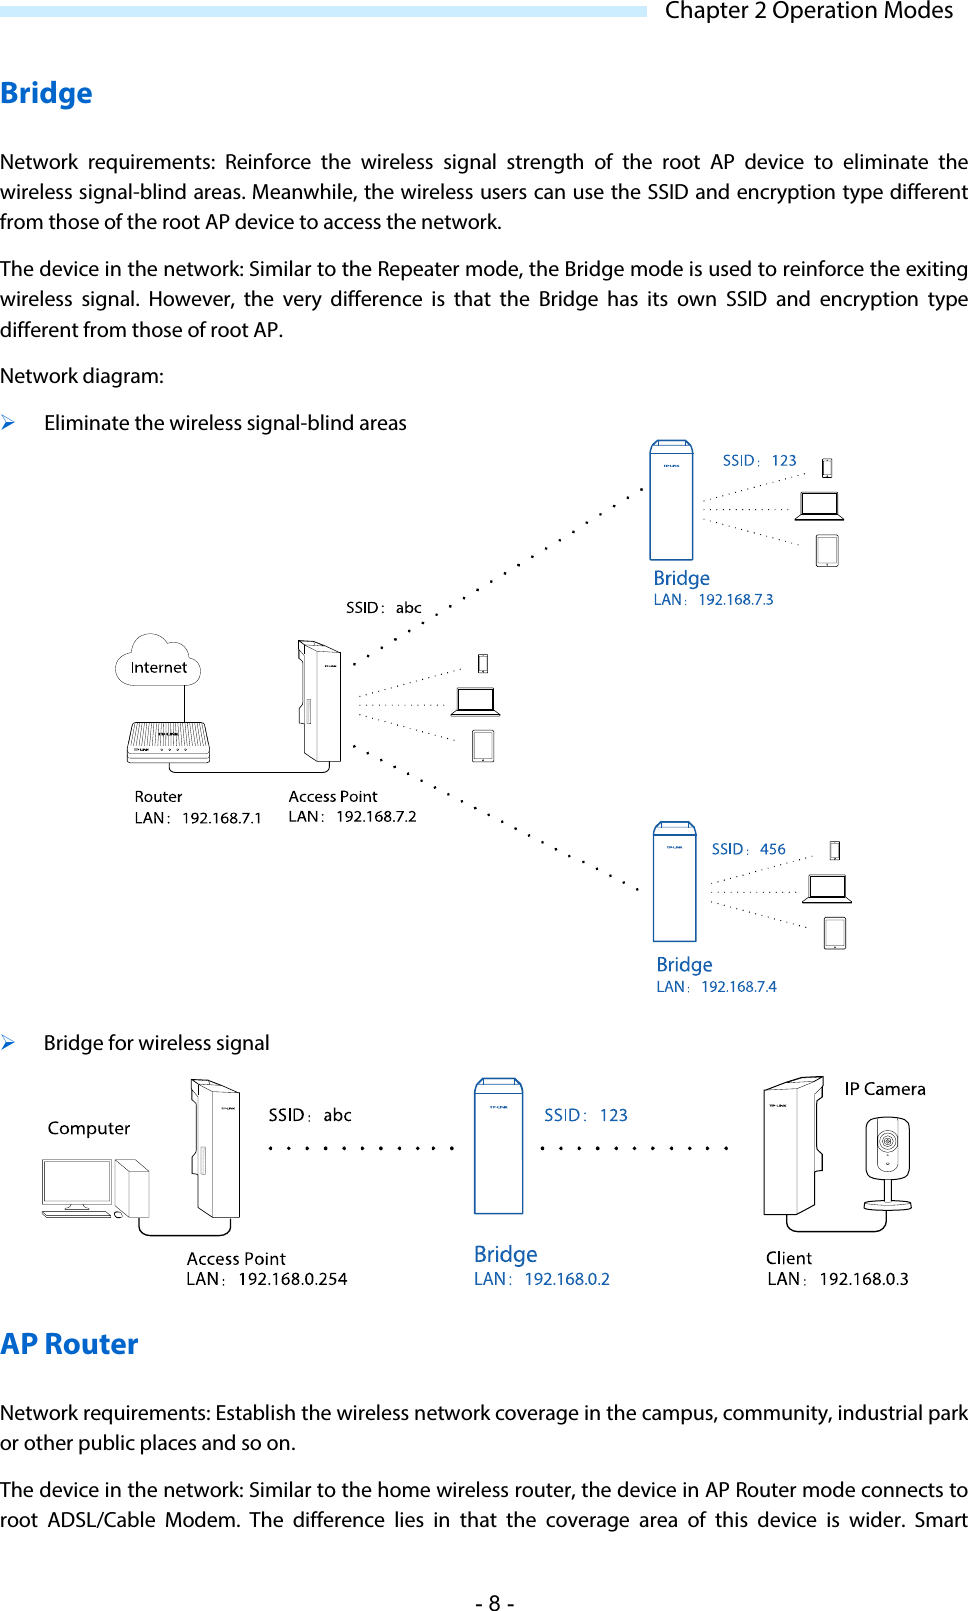  Chapter 2 Operation Modes Bridge Network requirements: Reinforce the wireless signal strength of the root AP device to eliminate the wireless signal-blind areas. Meanwhile, the wireless users can use the SSID and encryption type different from those of the root AP device to access the network. The device in the network: Similar to the Repeater mode, the Bridge mode is used to reinforce the exiting wireless signal. However, the very difference is that the Bridge has its own SSID and encryption type different from those of root AP. Network diagram:  Eliminate the wireless signal-blind areas   Bridge for wireless signal  AP Router Network requirements: Establish the wireless network coverage in the campus, community, industrial park or other public places and so on. The device in the network: Similar to the home wireless router, the device in AP Router mode connects to root  ADSL/Cable Modem. The difference lies in that the coverage area of this device is wider. Smart - 8 - 